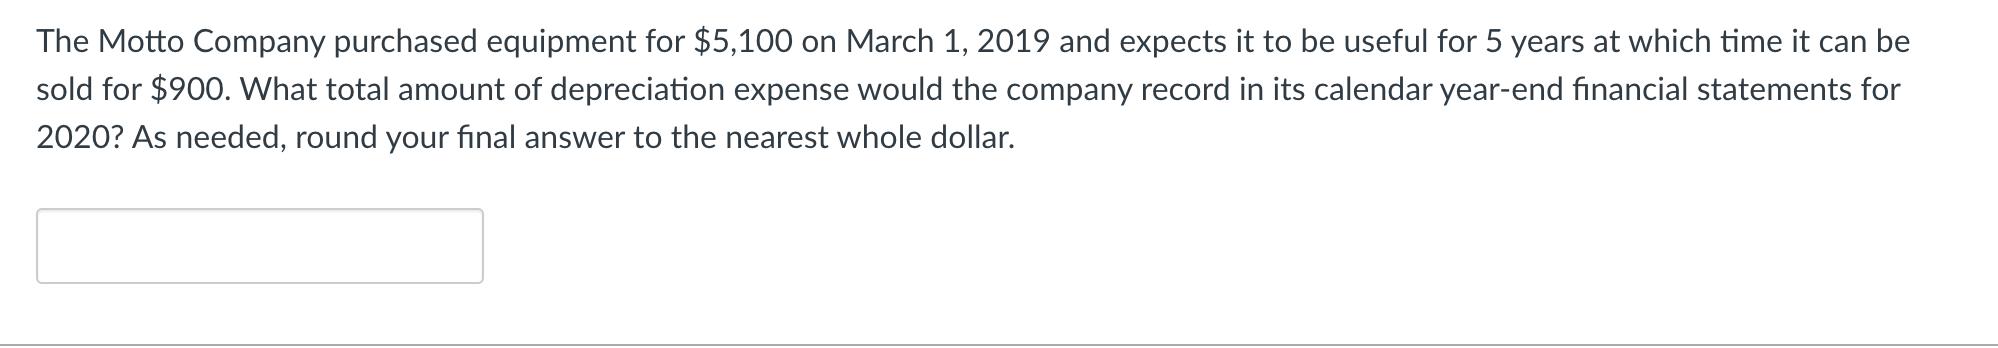 The Motto Company purchased equipment for $5,100 on March 1, 2019 and expects it to be useful for 5 years at which time it ca